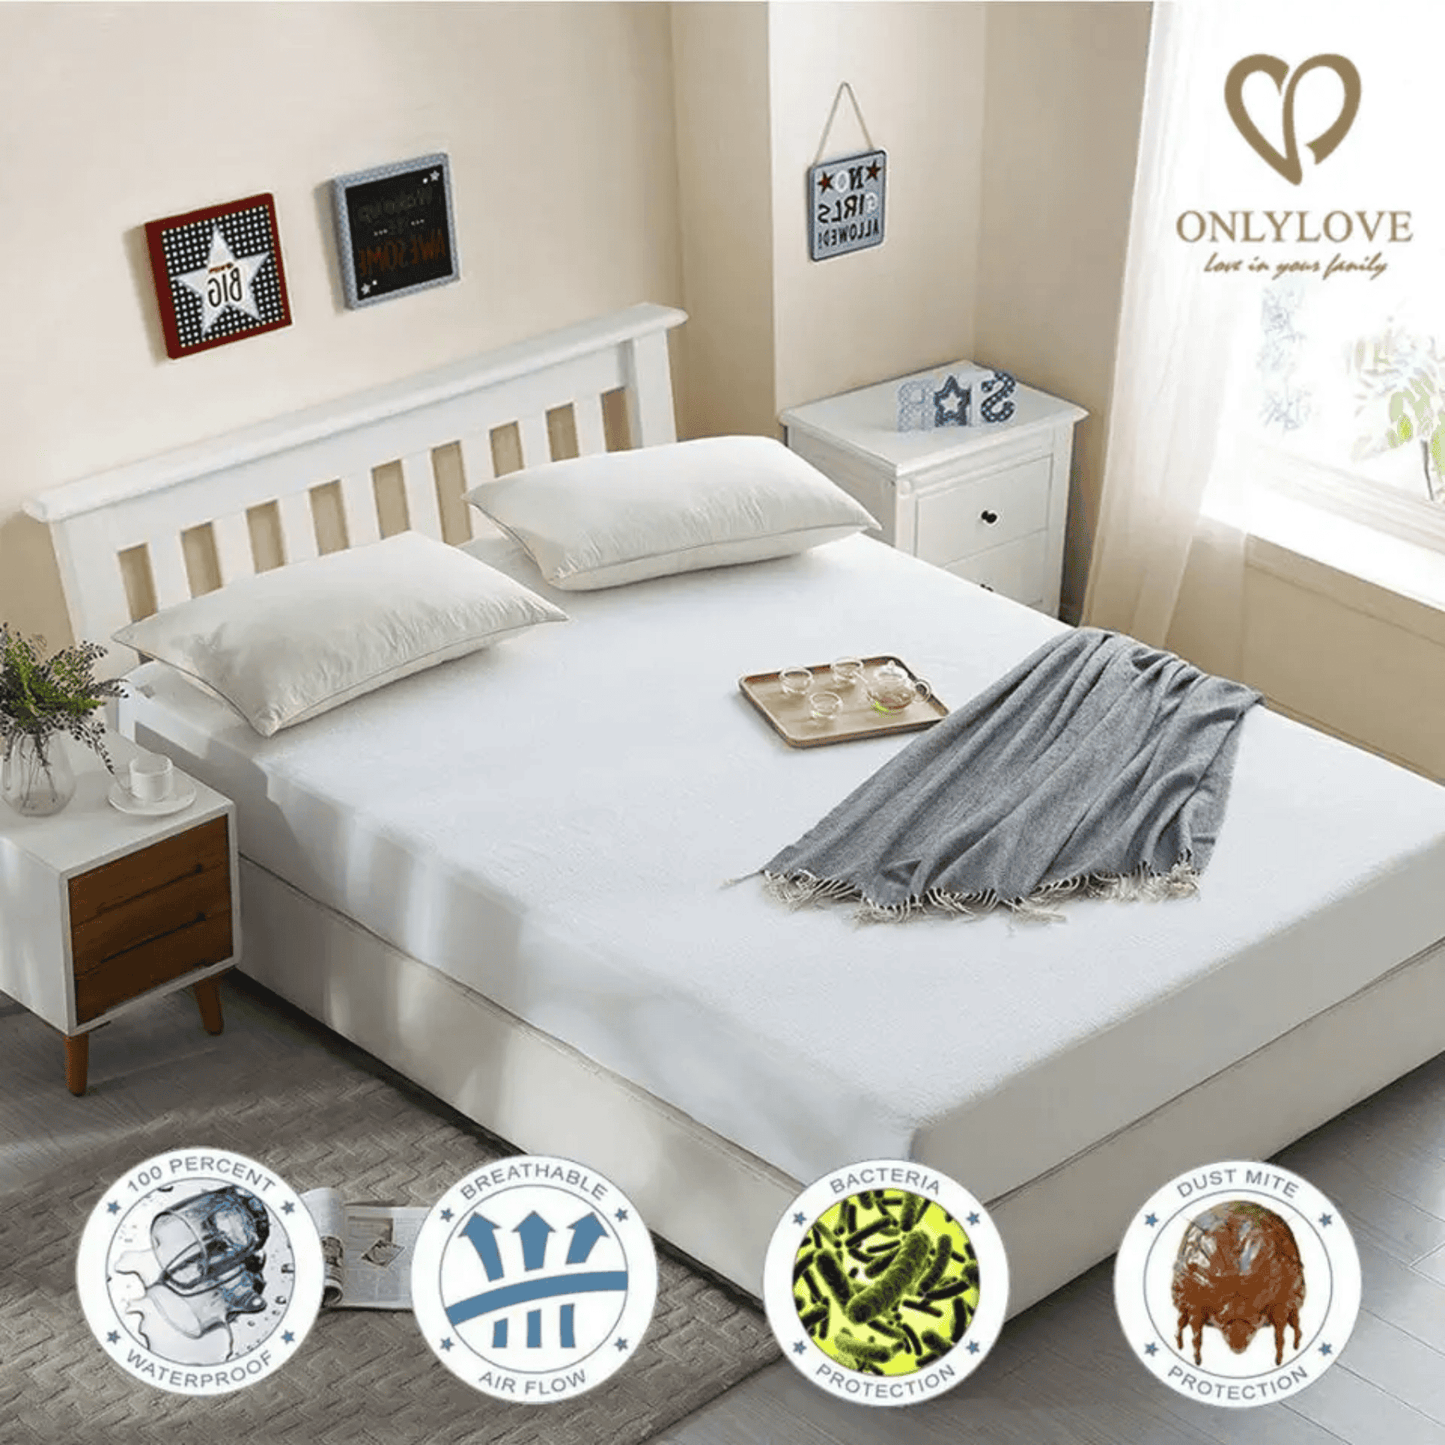 PLAIN WHITE SOLID WATERPROOF MATTRESS PROTECTOR, FITTED STYLE ELASTIC ALL AROUND {5 PCS PER CASE}